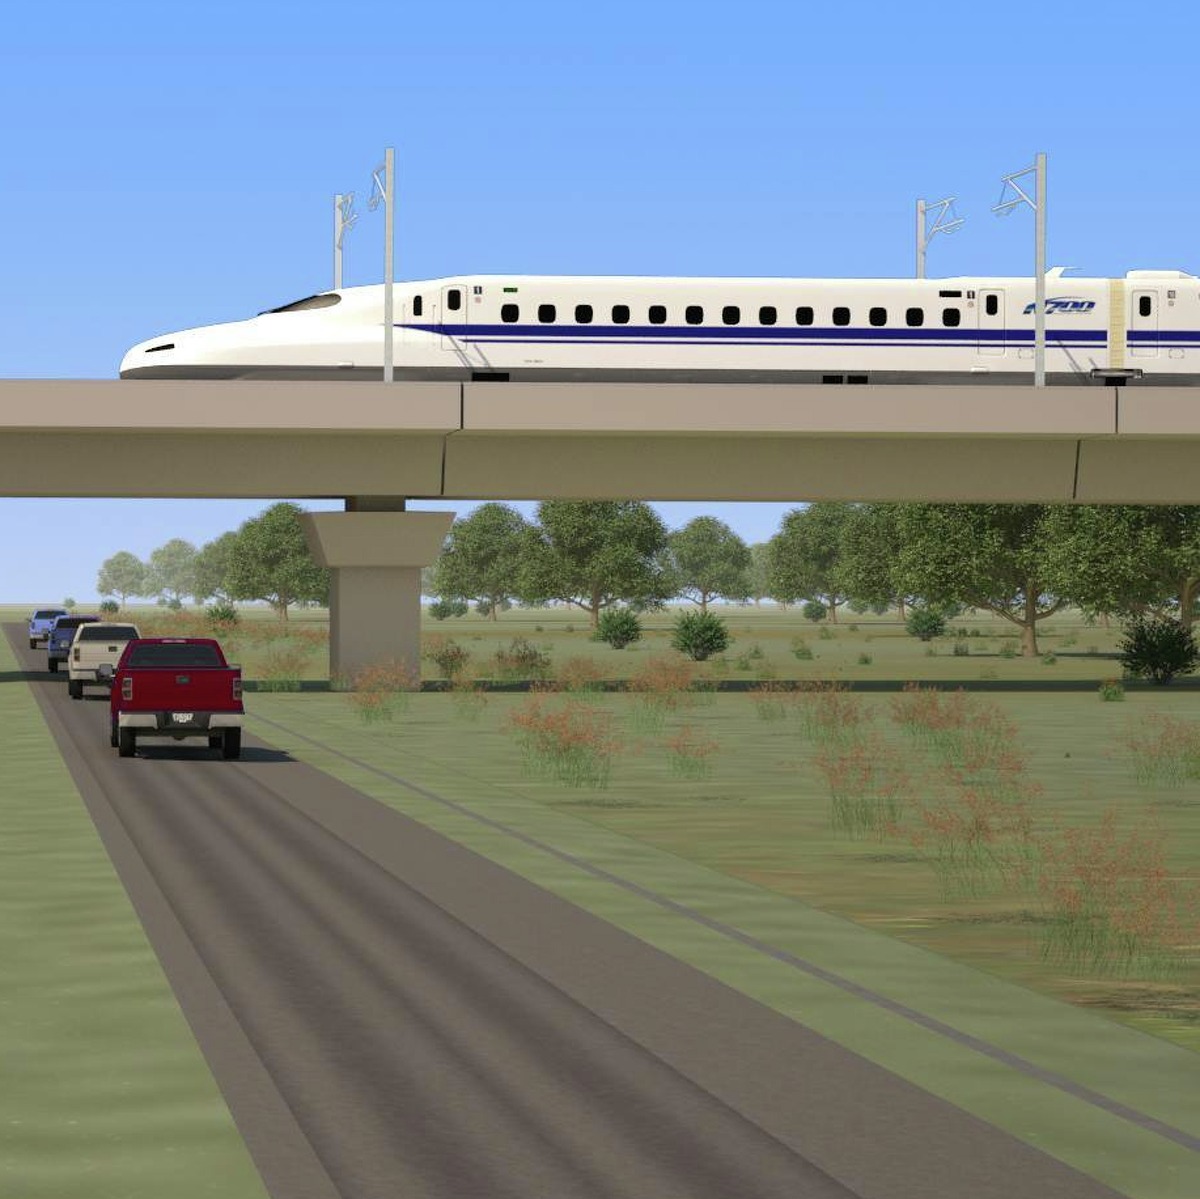 Texas Central Partners plans to use earthen berms and viaducts to separate high-speed trains from streets and across rural areas, as shown in their renderings in August 2017.